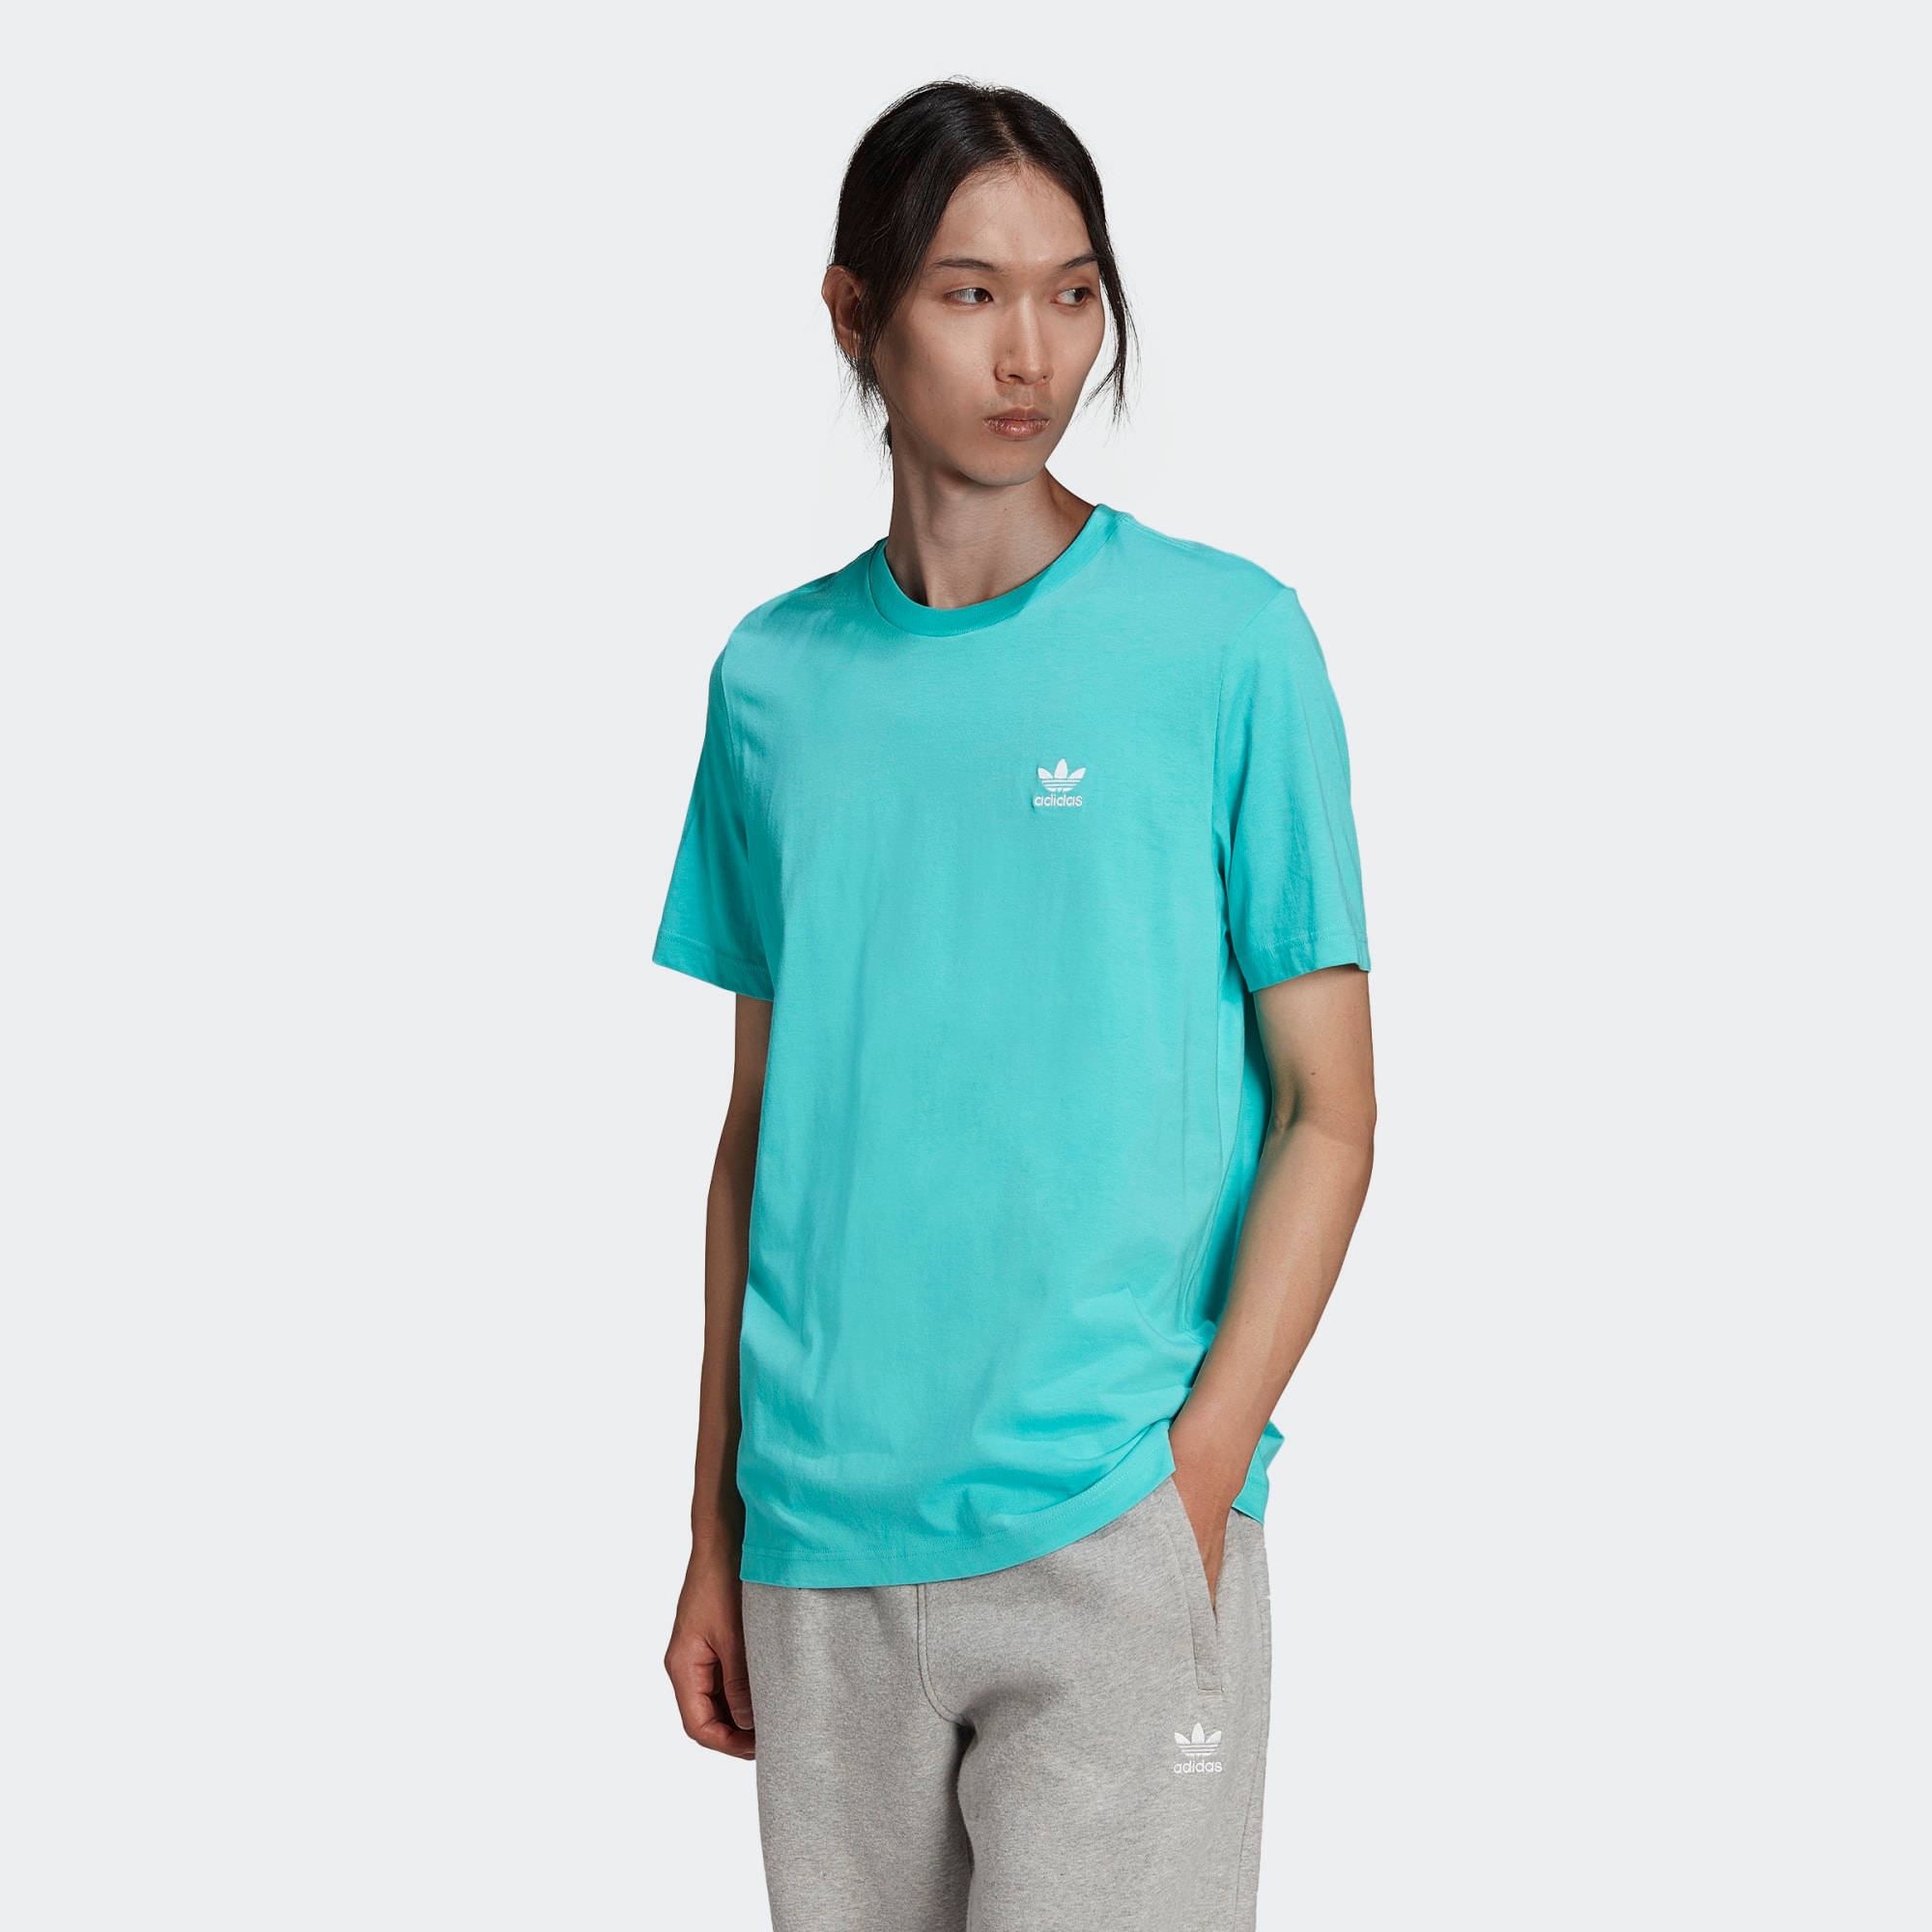 Sole | To Where Adicolor | Loungewear HJ7983 T-shirt Supplier | adidas Buy Trefoil Essentials The